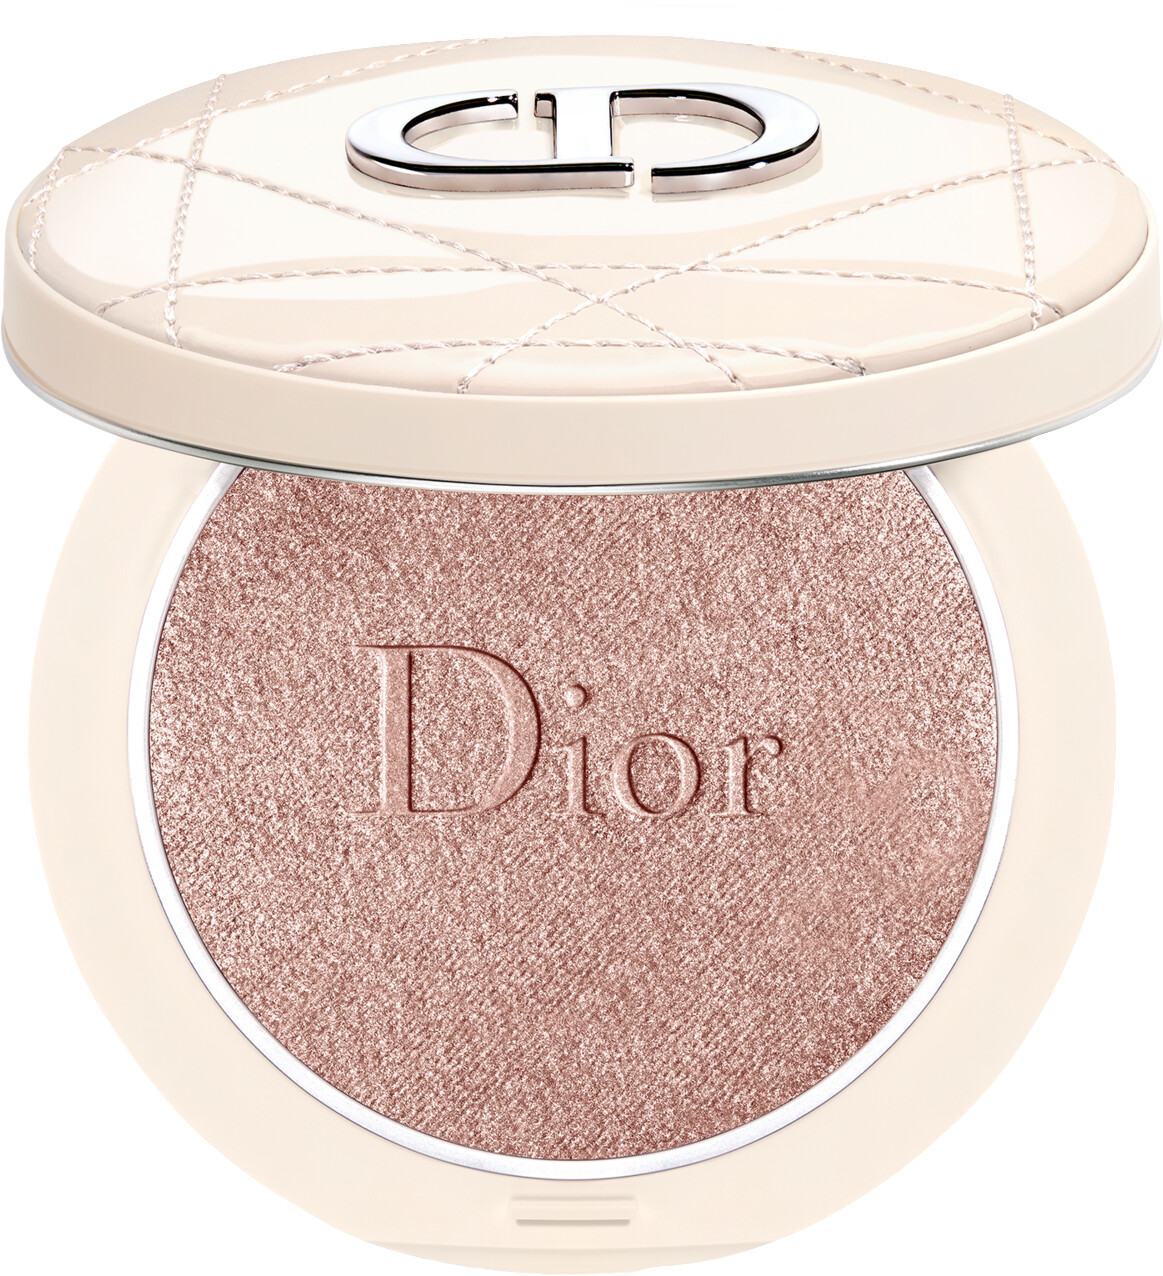 DIOR Forever Couture Luminizer 6g 05 - Rosewood Glow